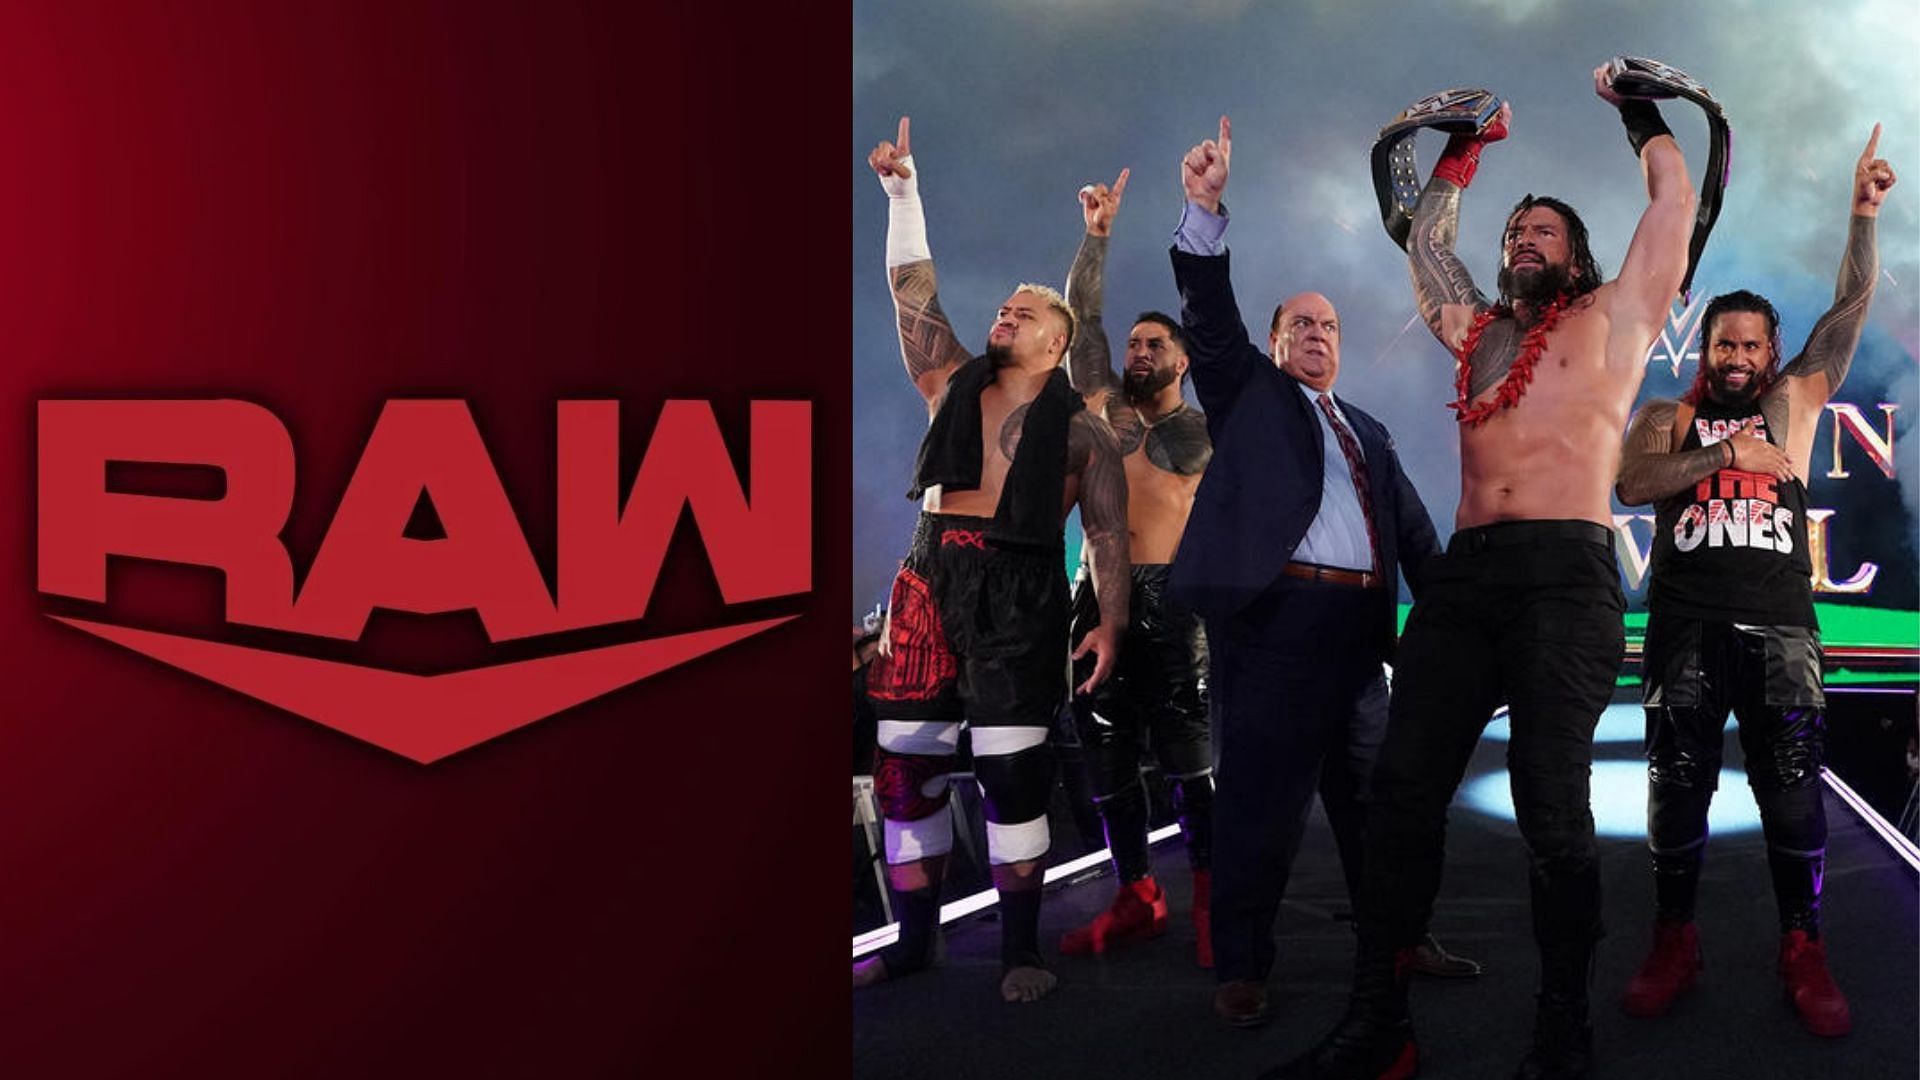 A match was canceled last night during WWE RAW.